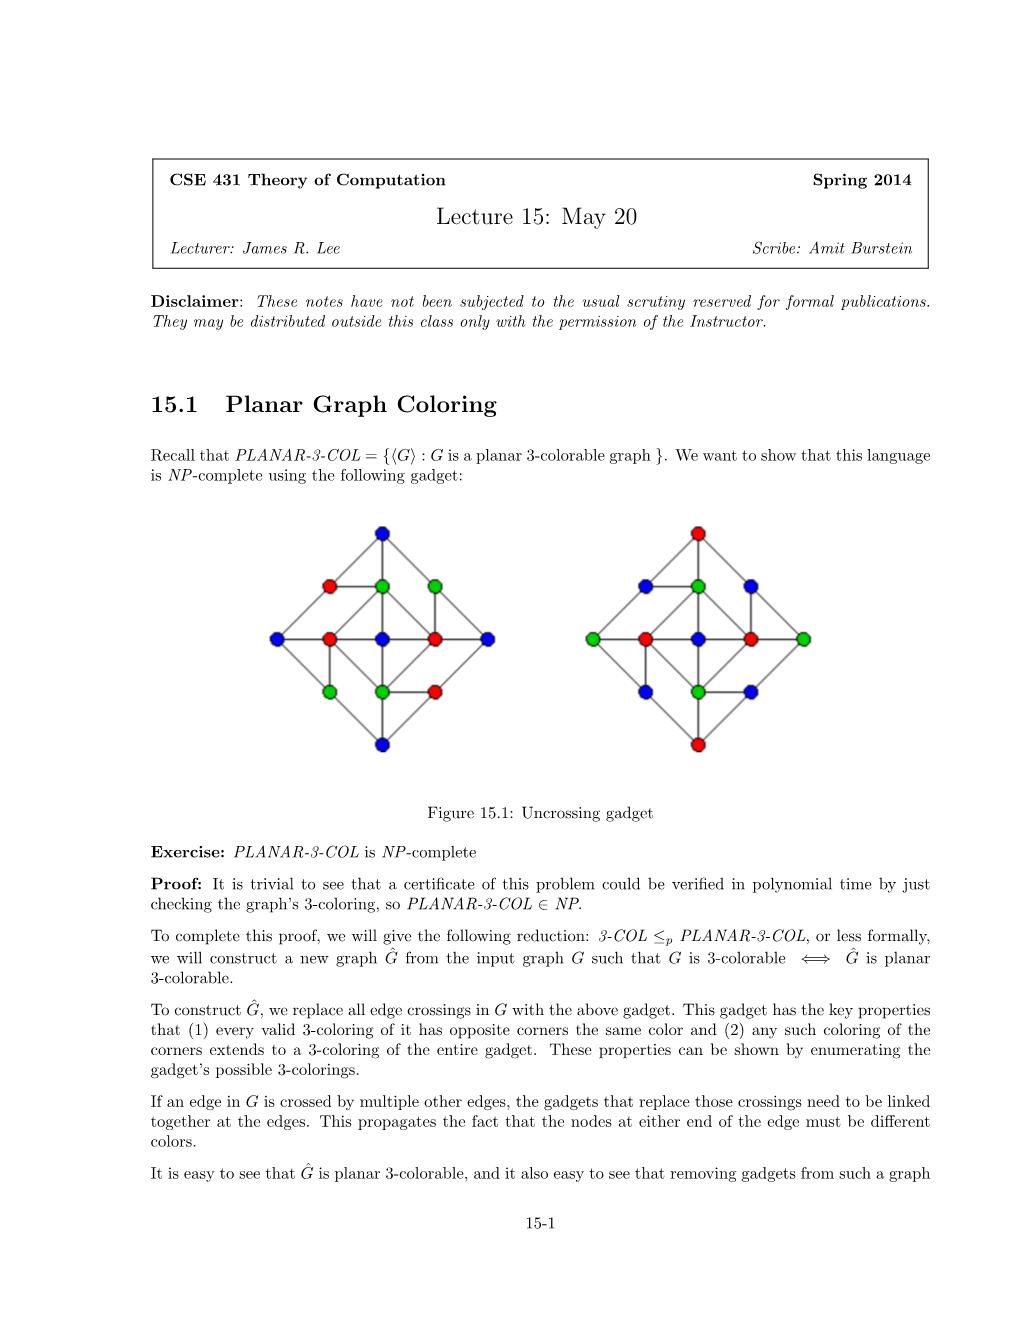 Lecture 15: May 20 15.1 Planar Graph Coloring